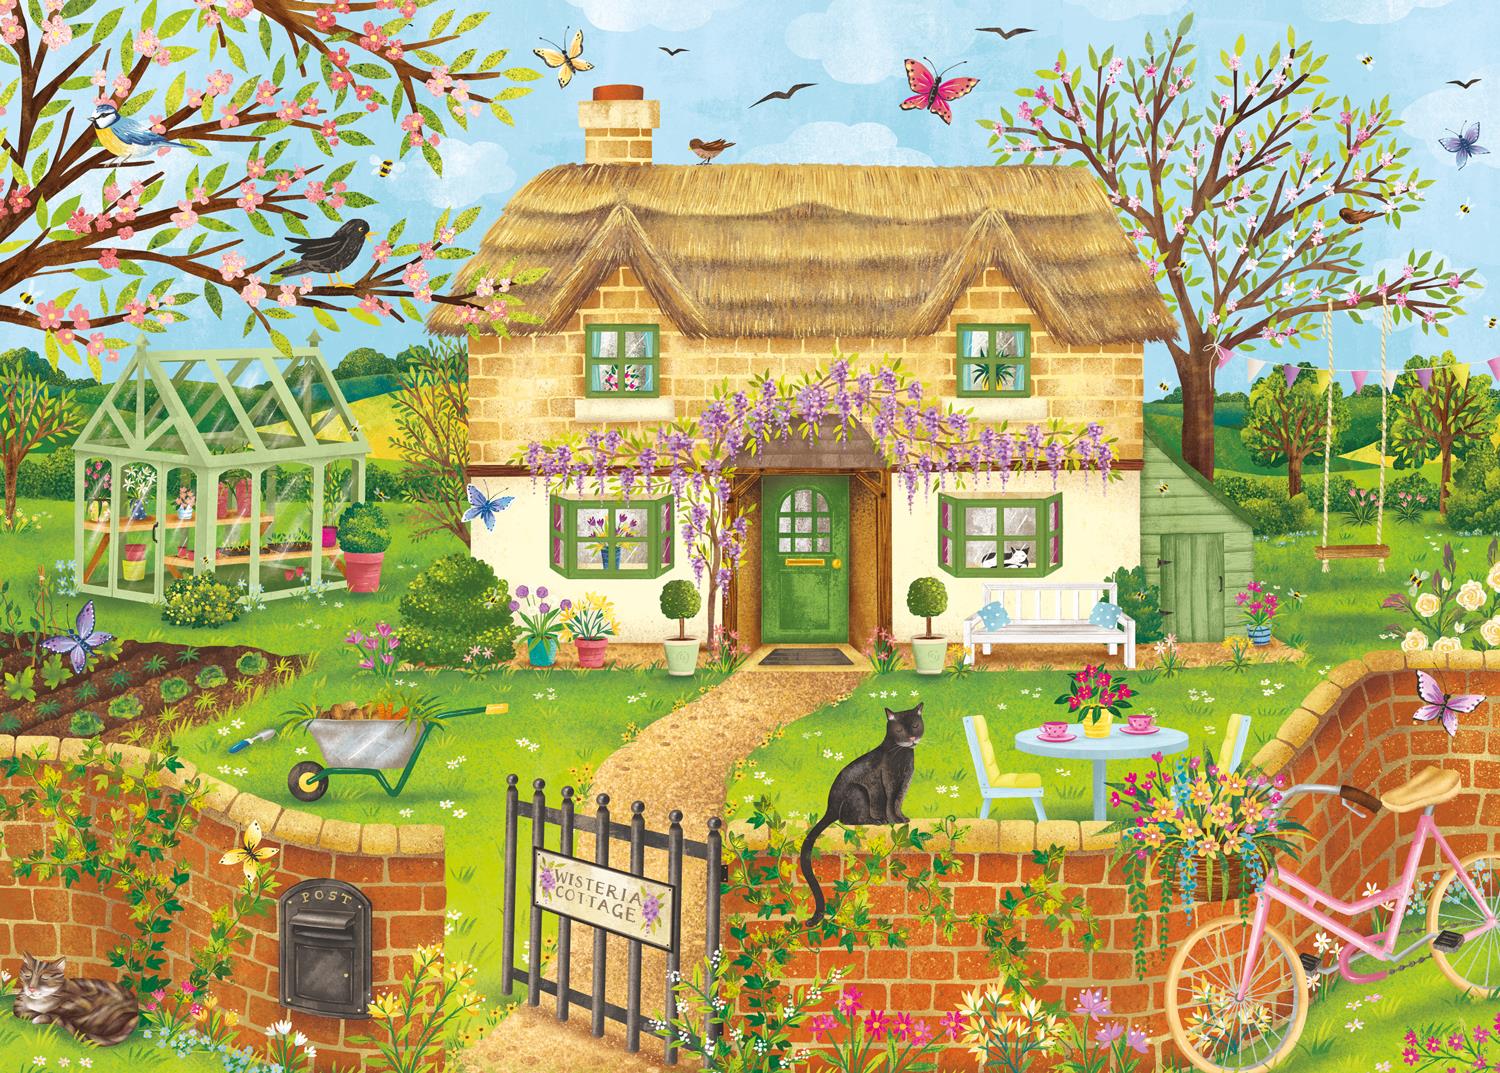 Otter House Wisteria Cottage Jigsaw Puzzle (1000 Pieces)